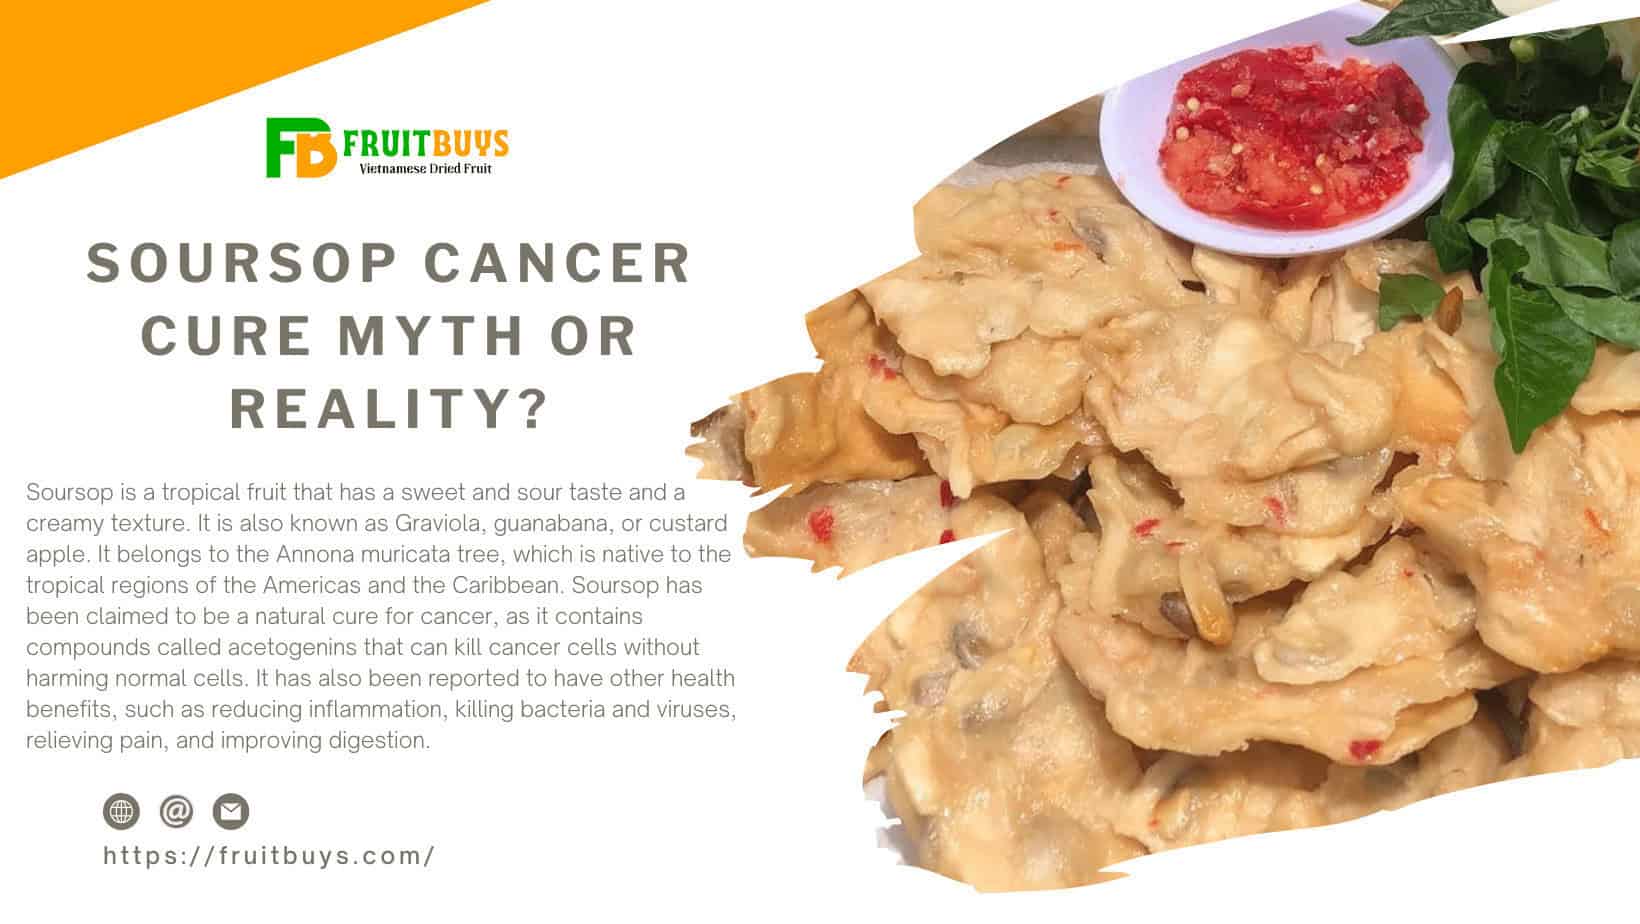 FruitBuys Vietnam  Soursop Cancer Cure Myth Or Reality